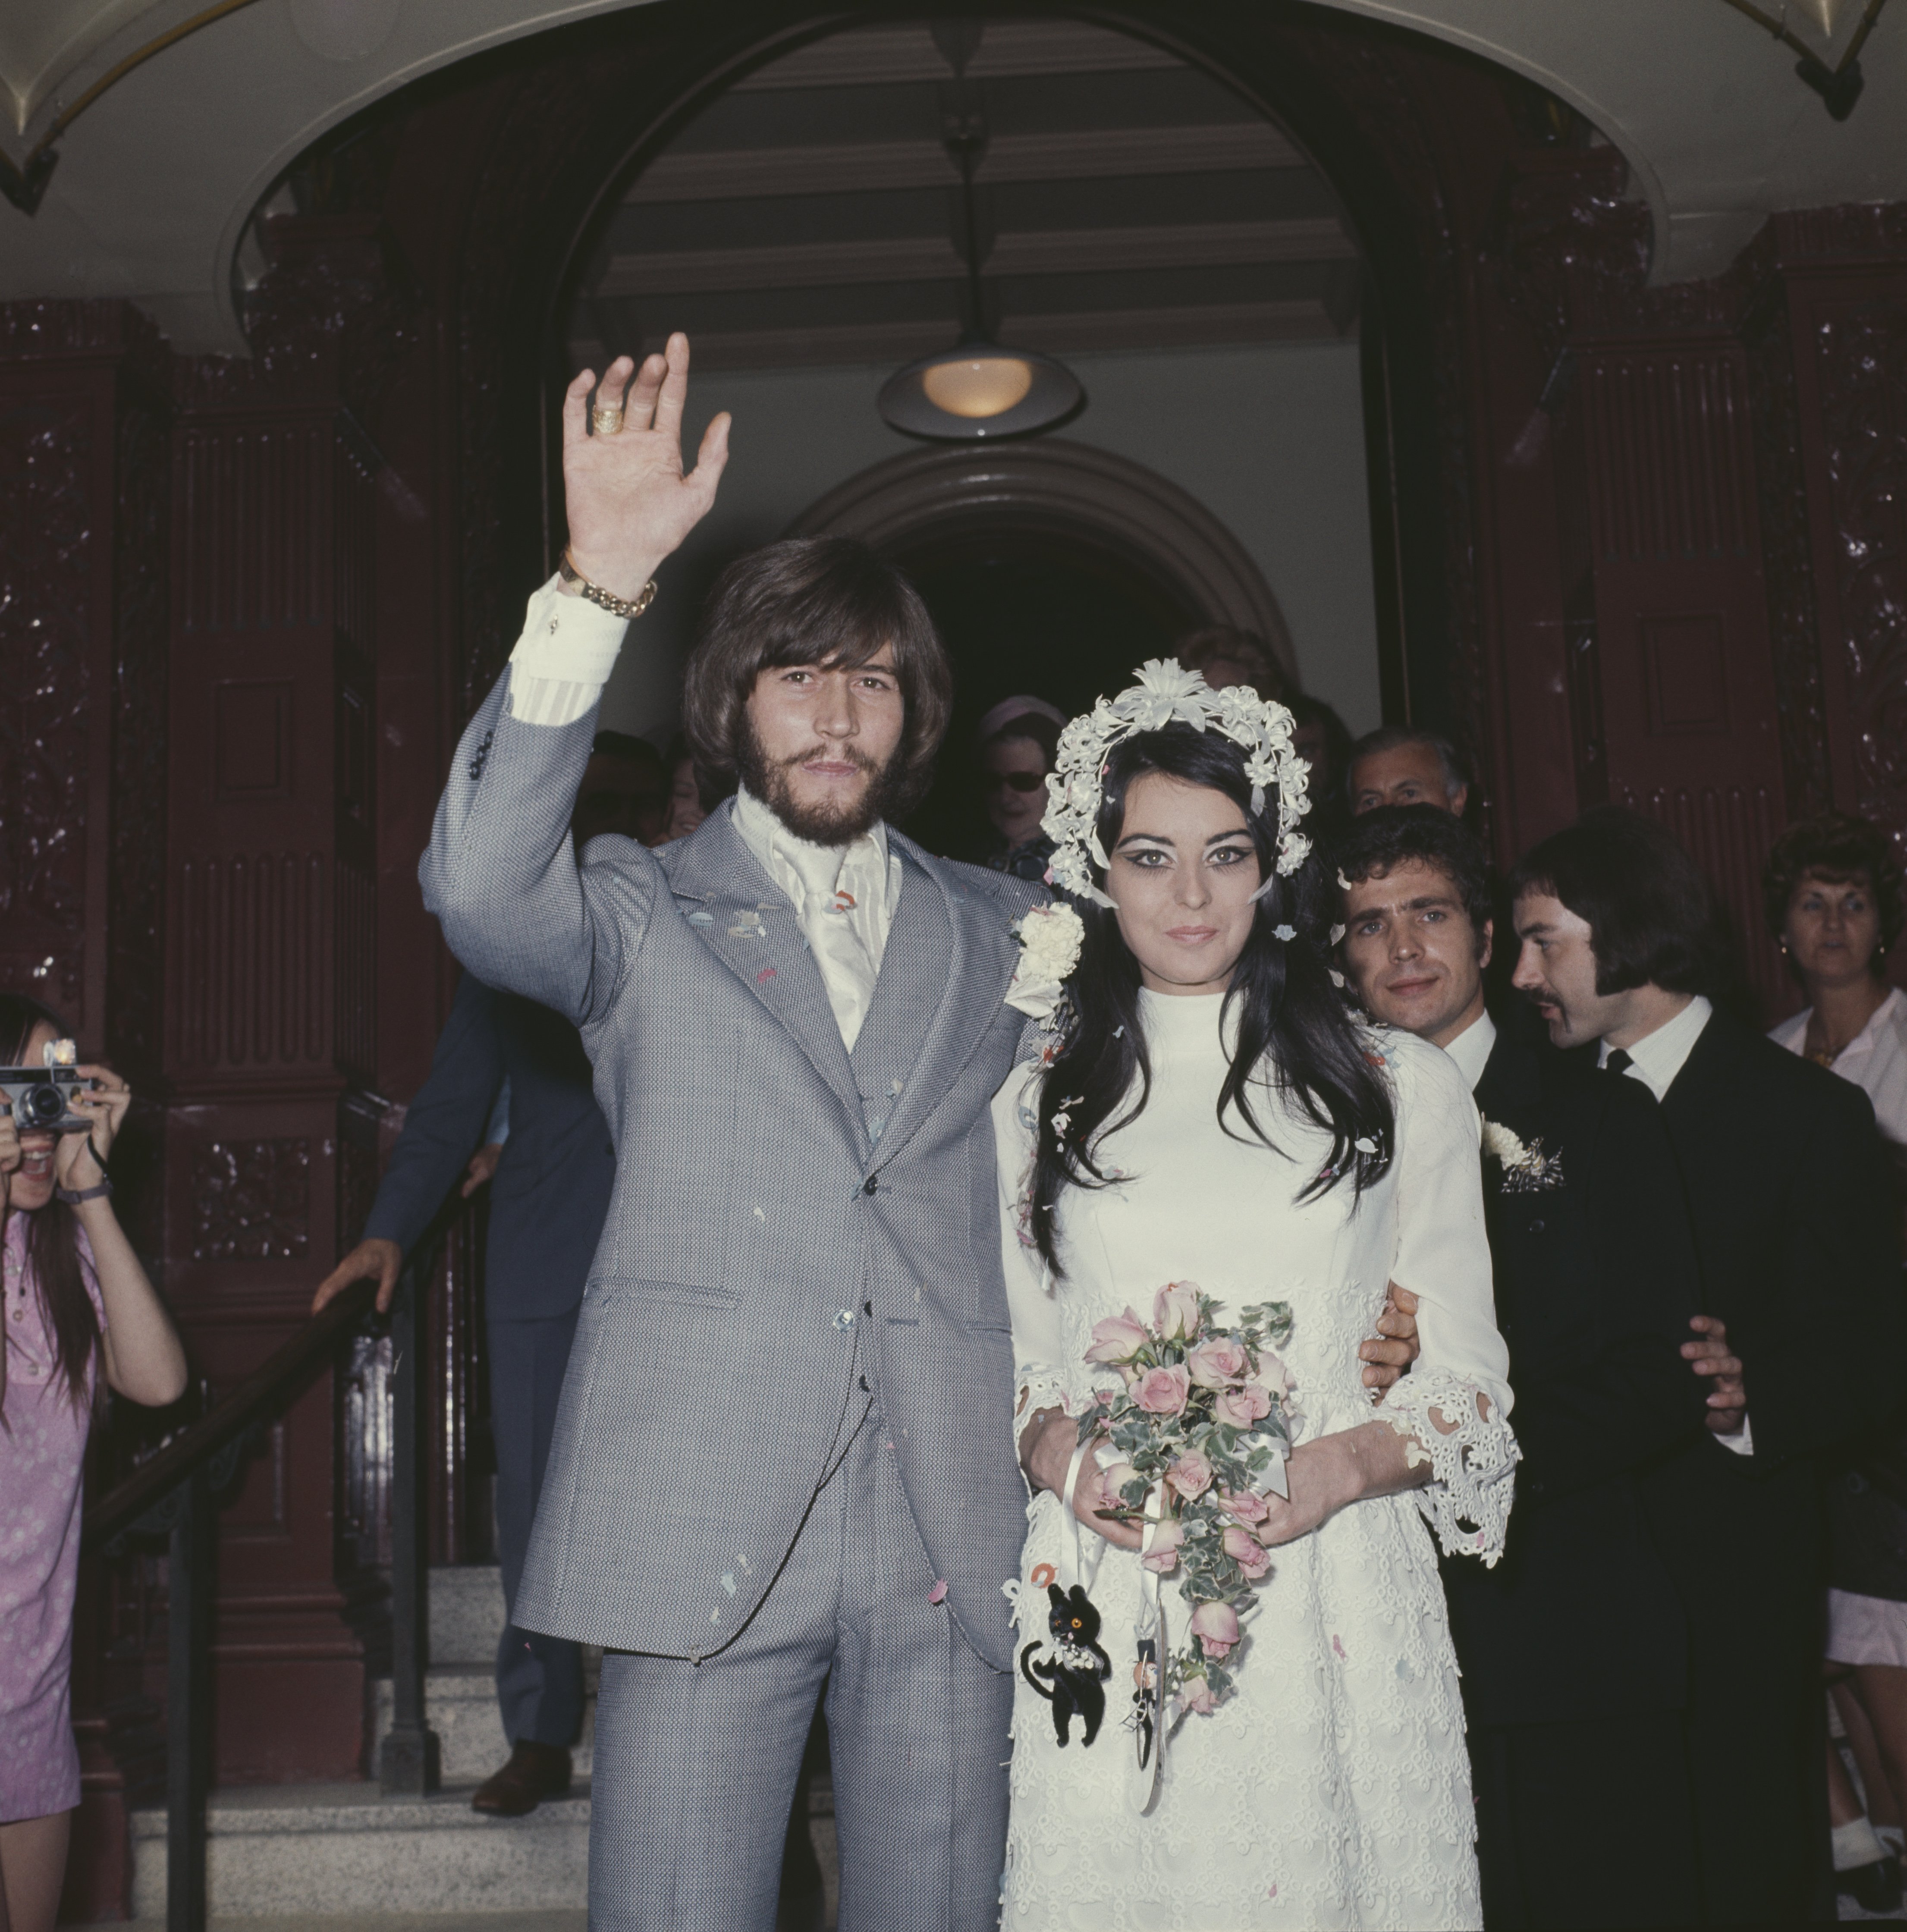 Singer Barry Gibb of The Bee Gees marries Linda Gray, 1st September 1970. | Source: Getty Images